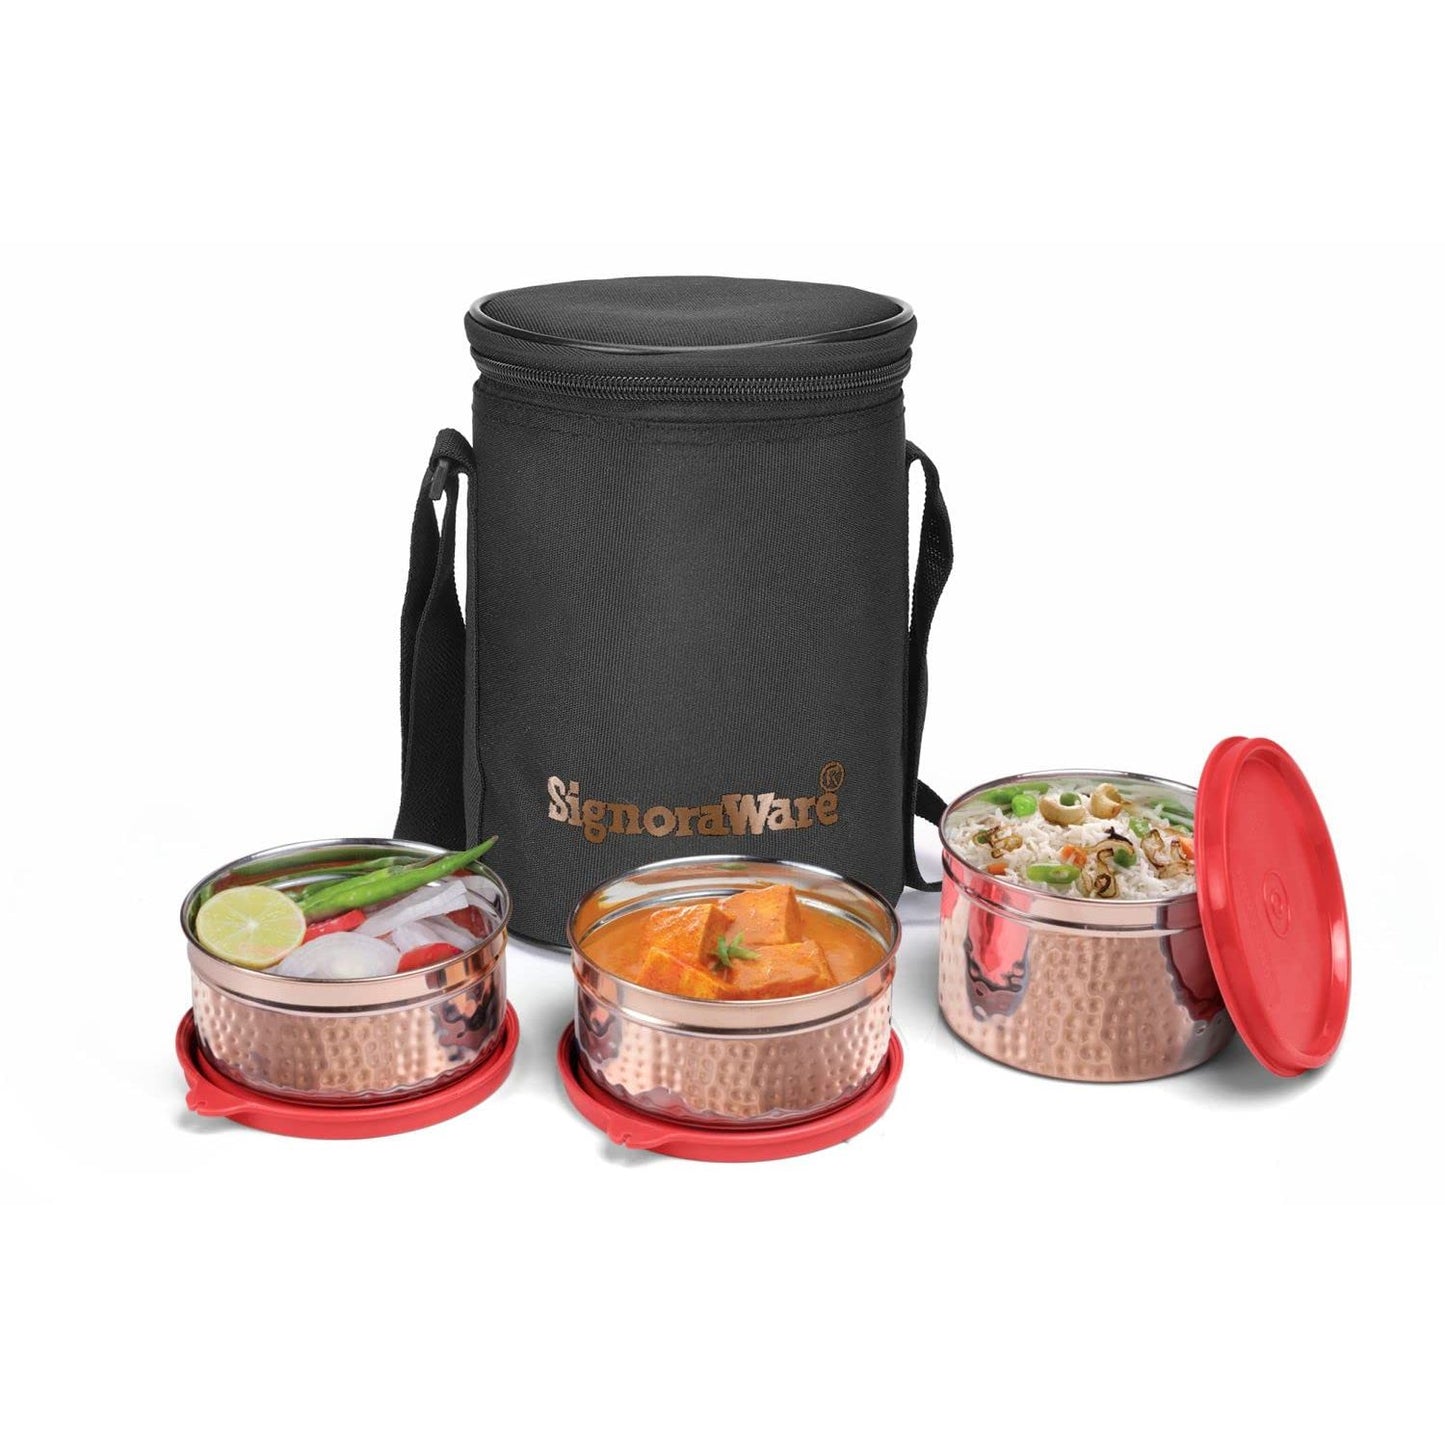 Signoraware Executive Copper Stainless Steel Inner Lunch Box with Bag